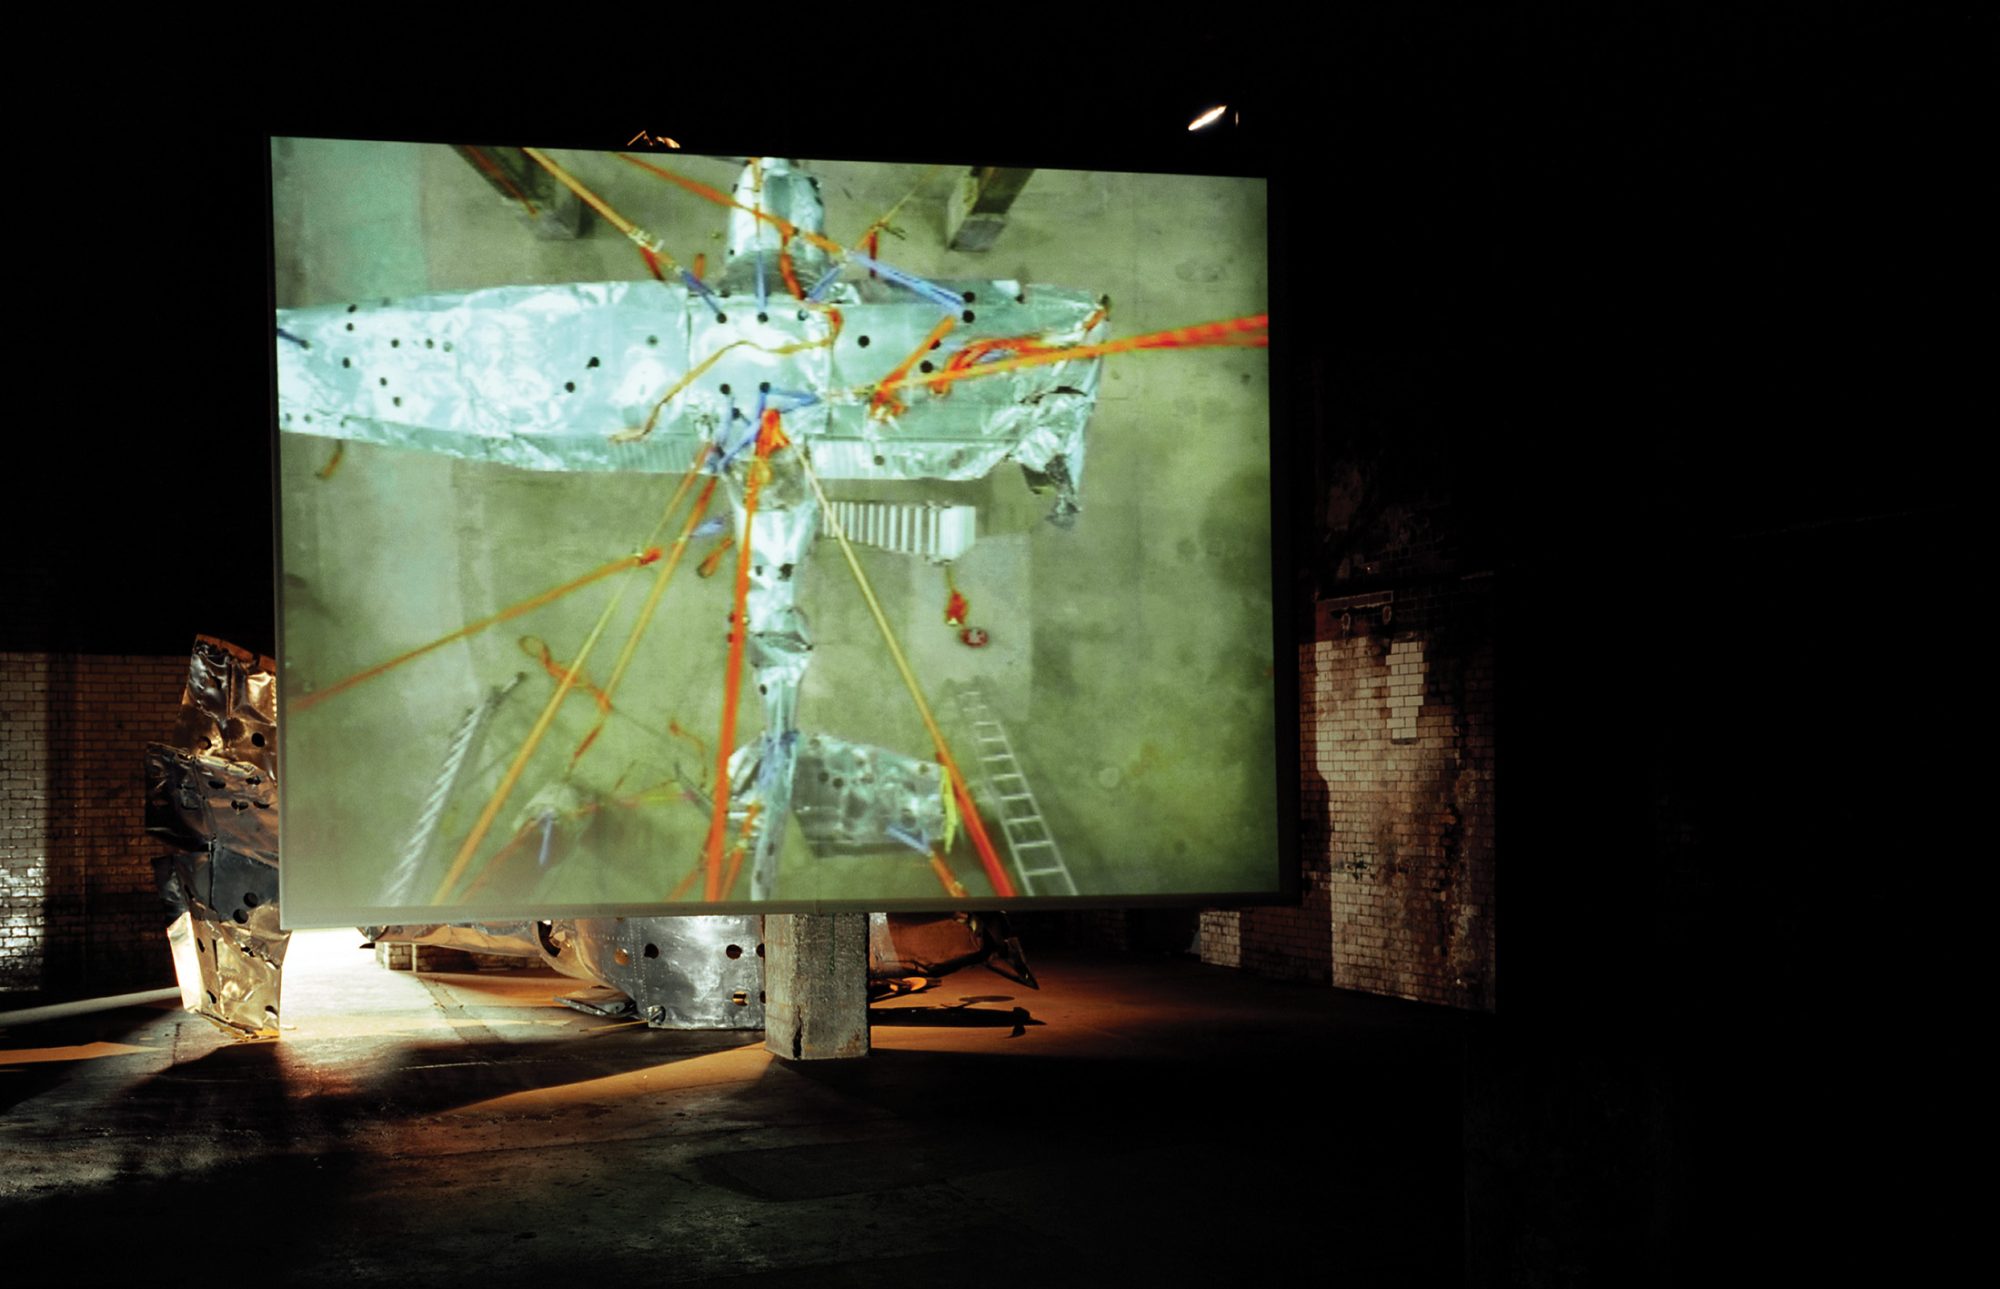 Butterfly by Richard Wilson, 2003, installation view at Wapping Hydraulic Power Station